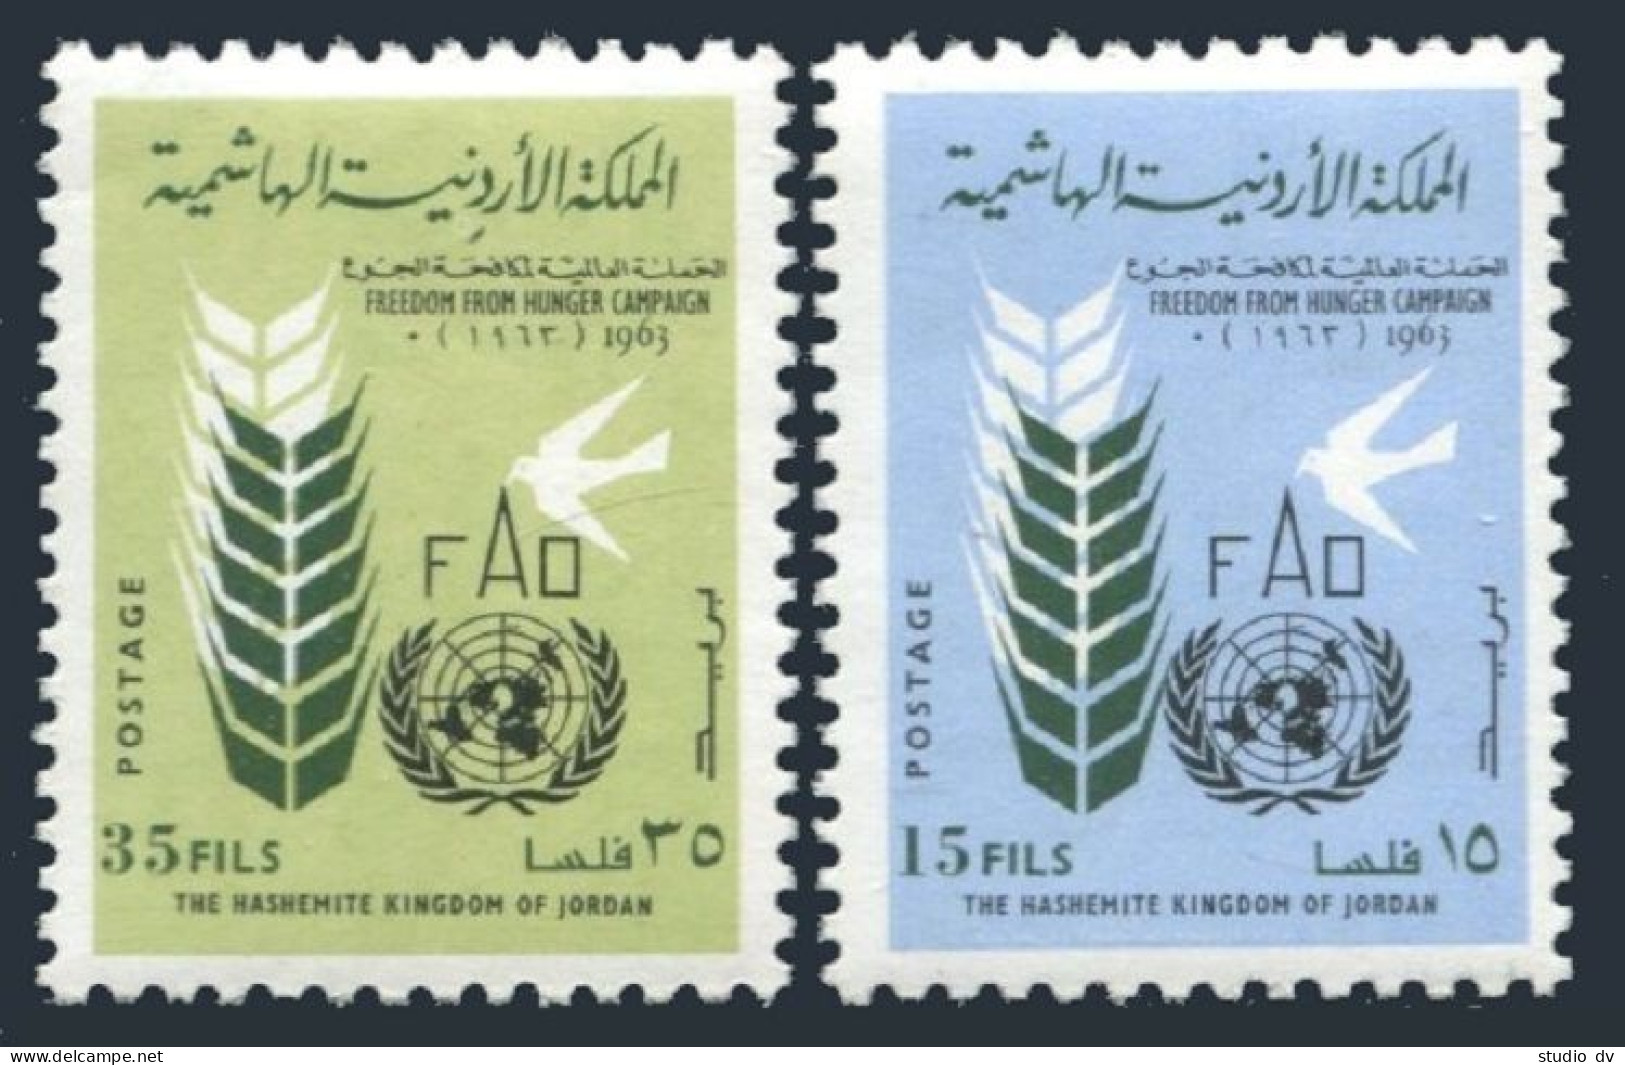 Jordan 398-399,399a & Imperf, MNH. FAO Freedom From Hunger Campaign 1963. - Jordan